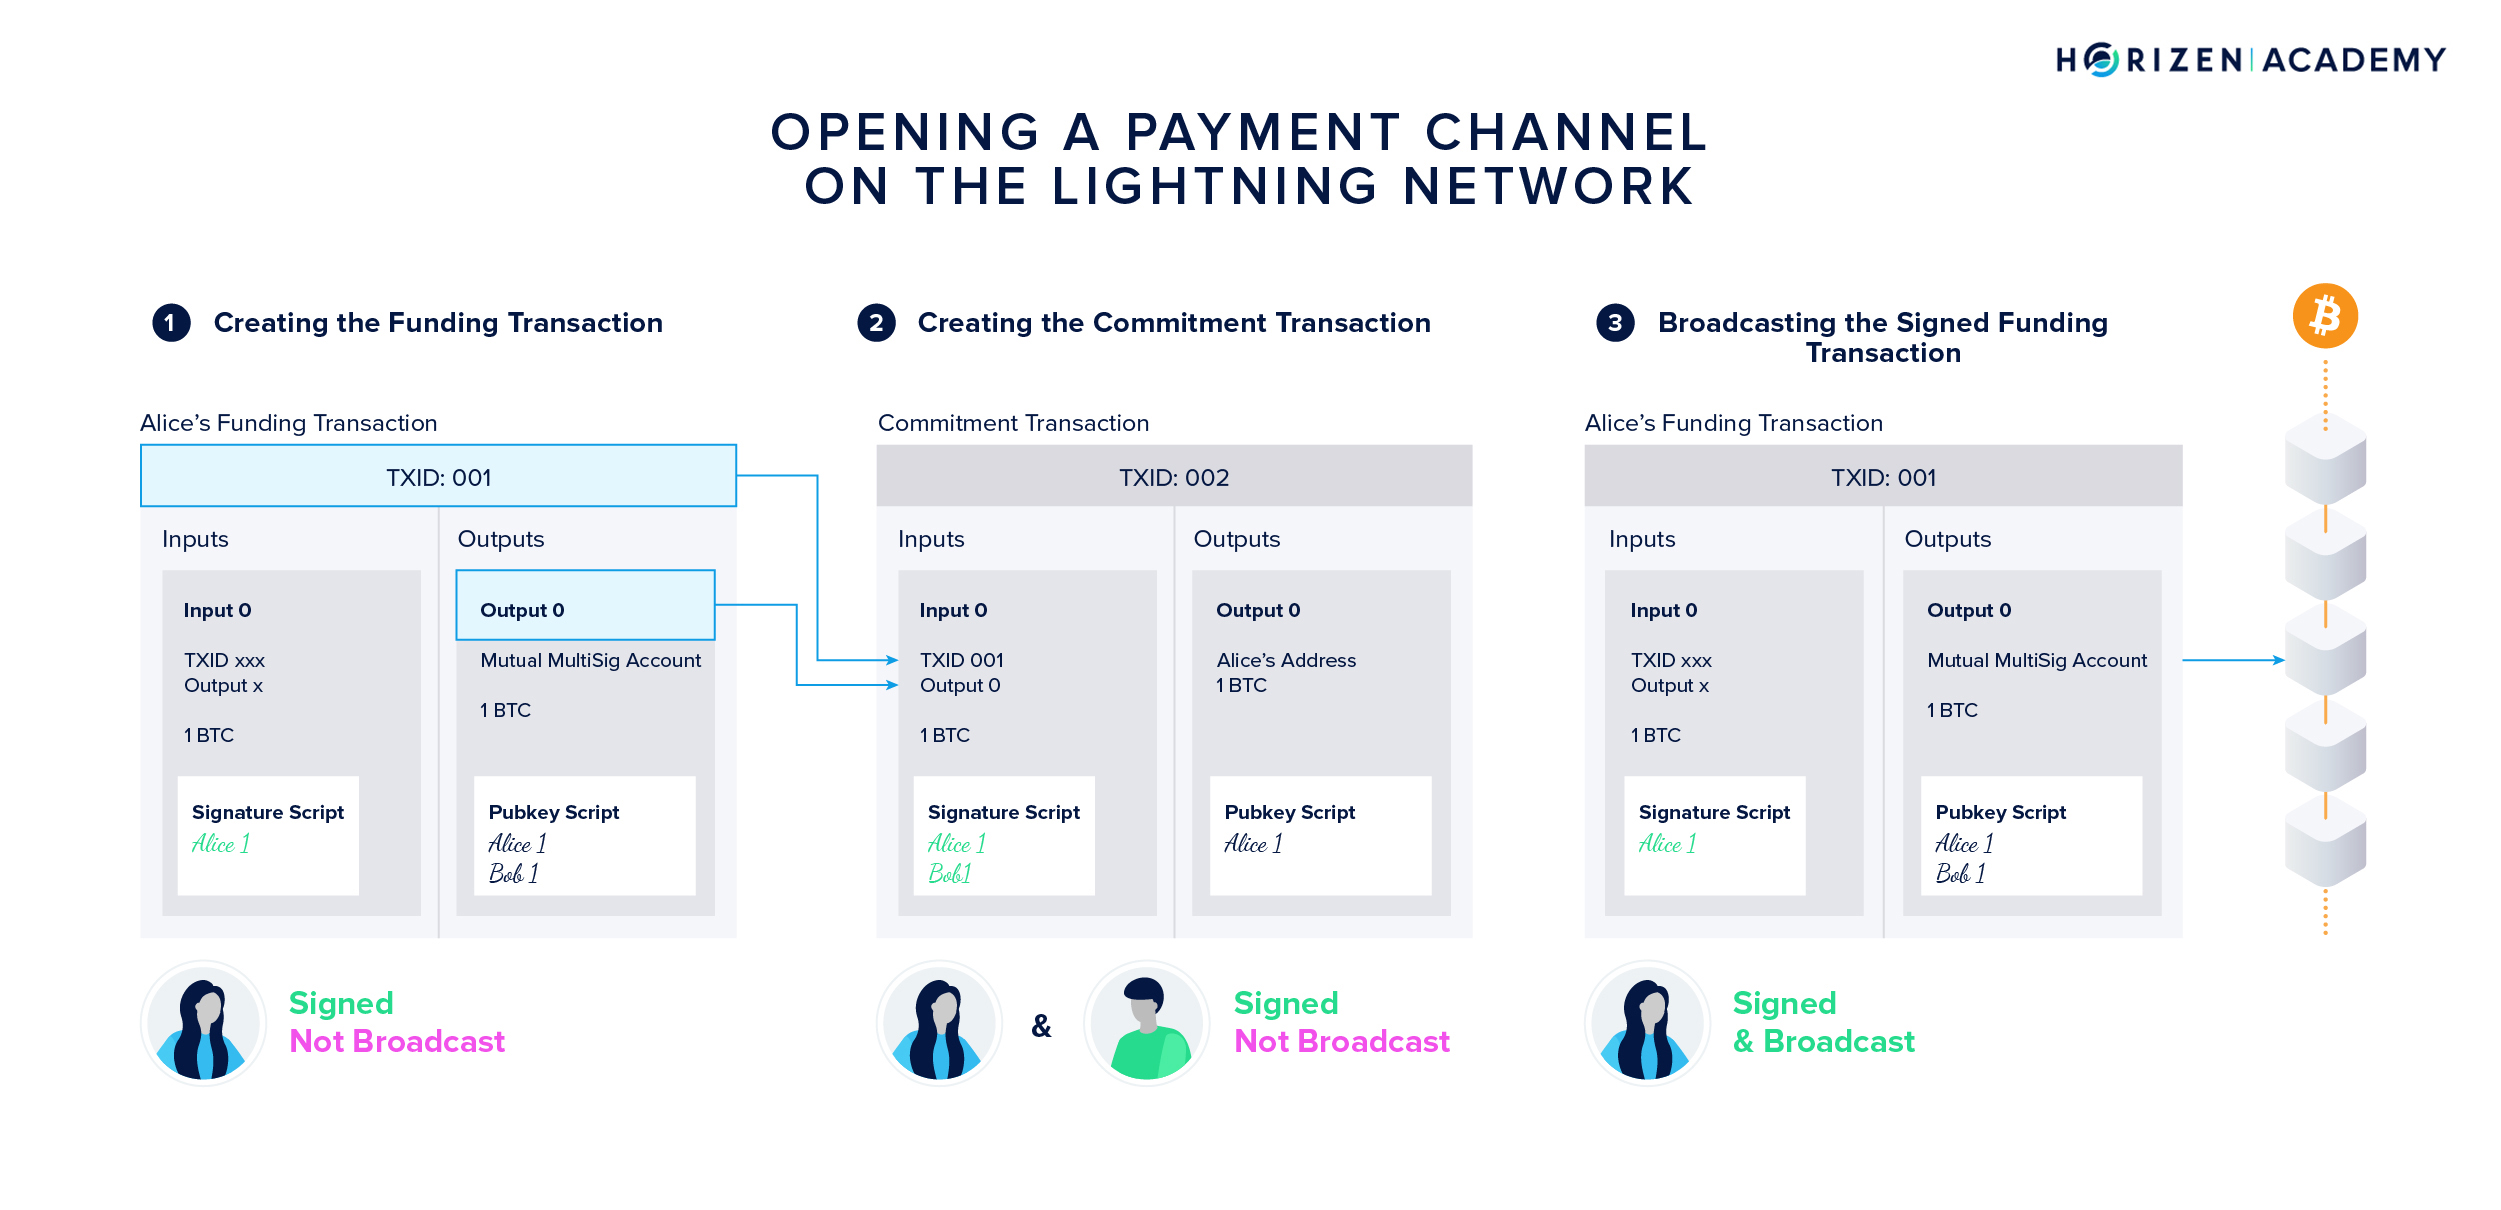 Unilateral payment channel funding and opening